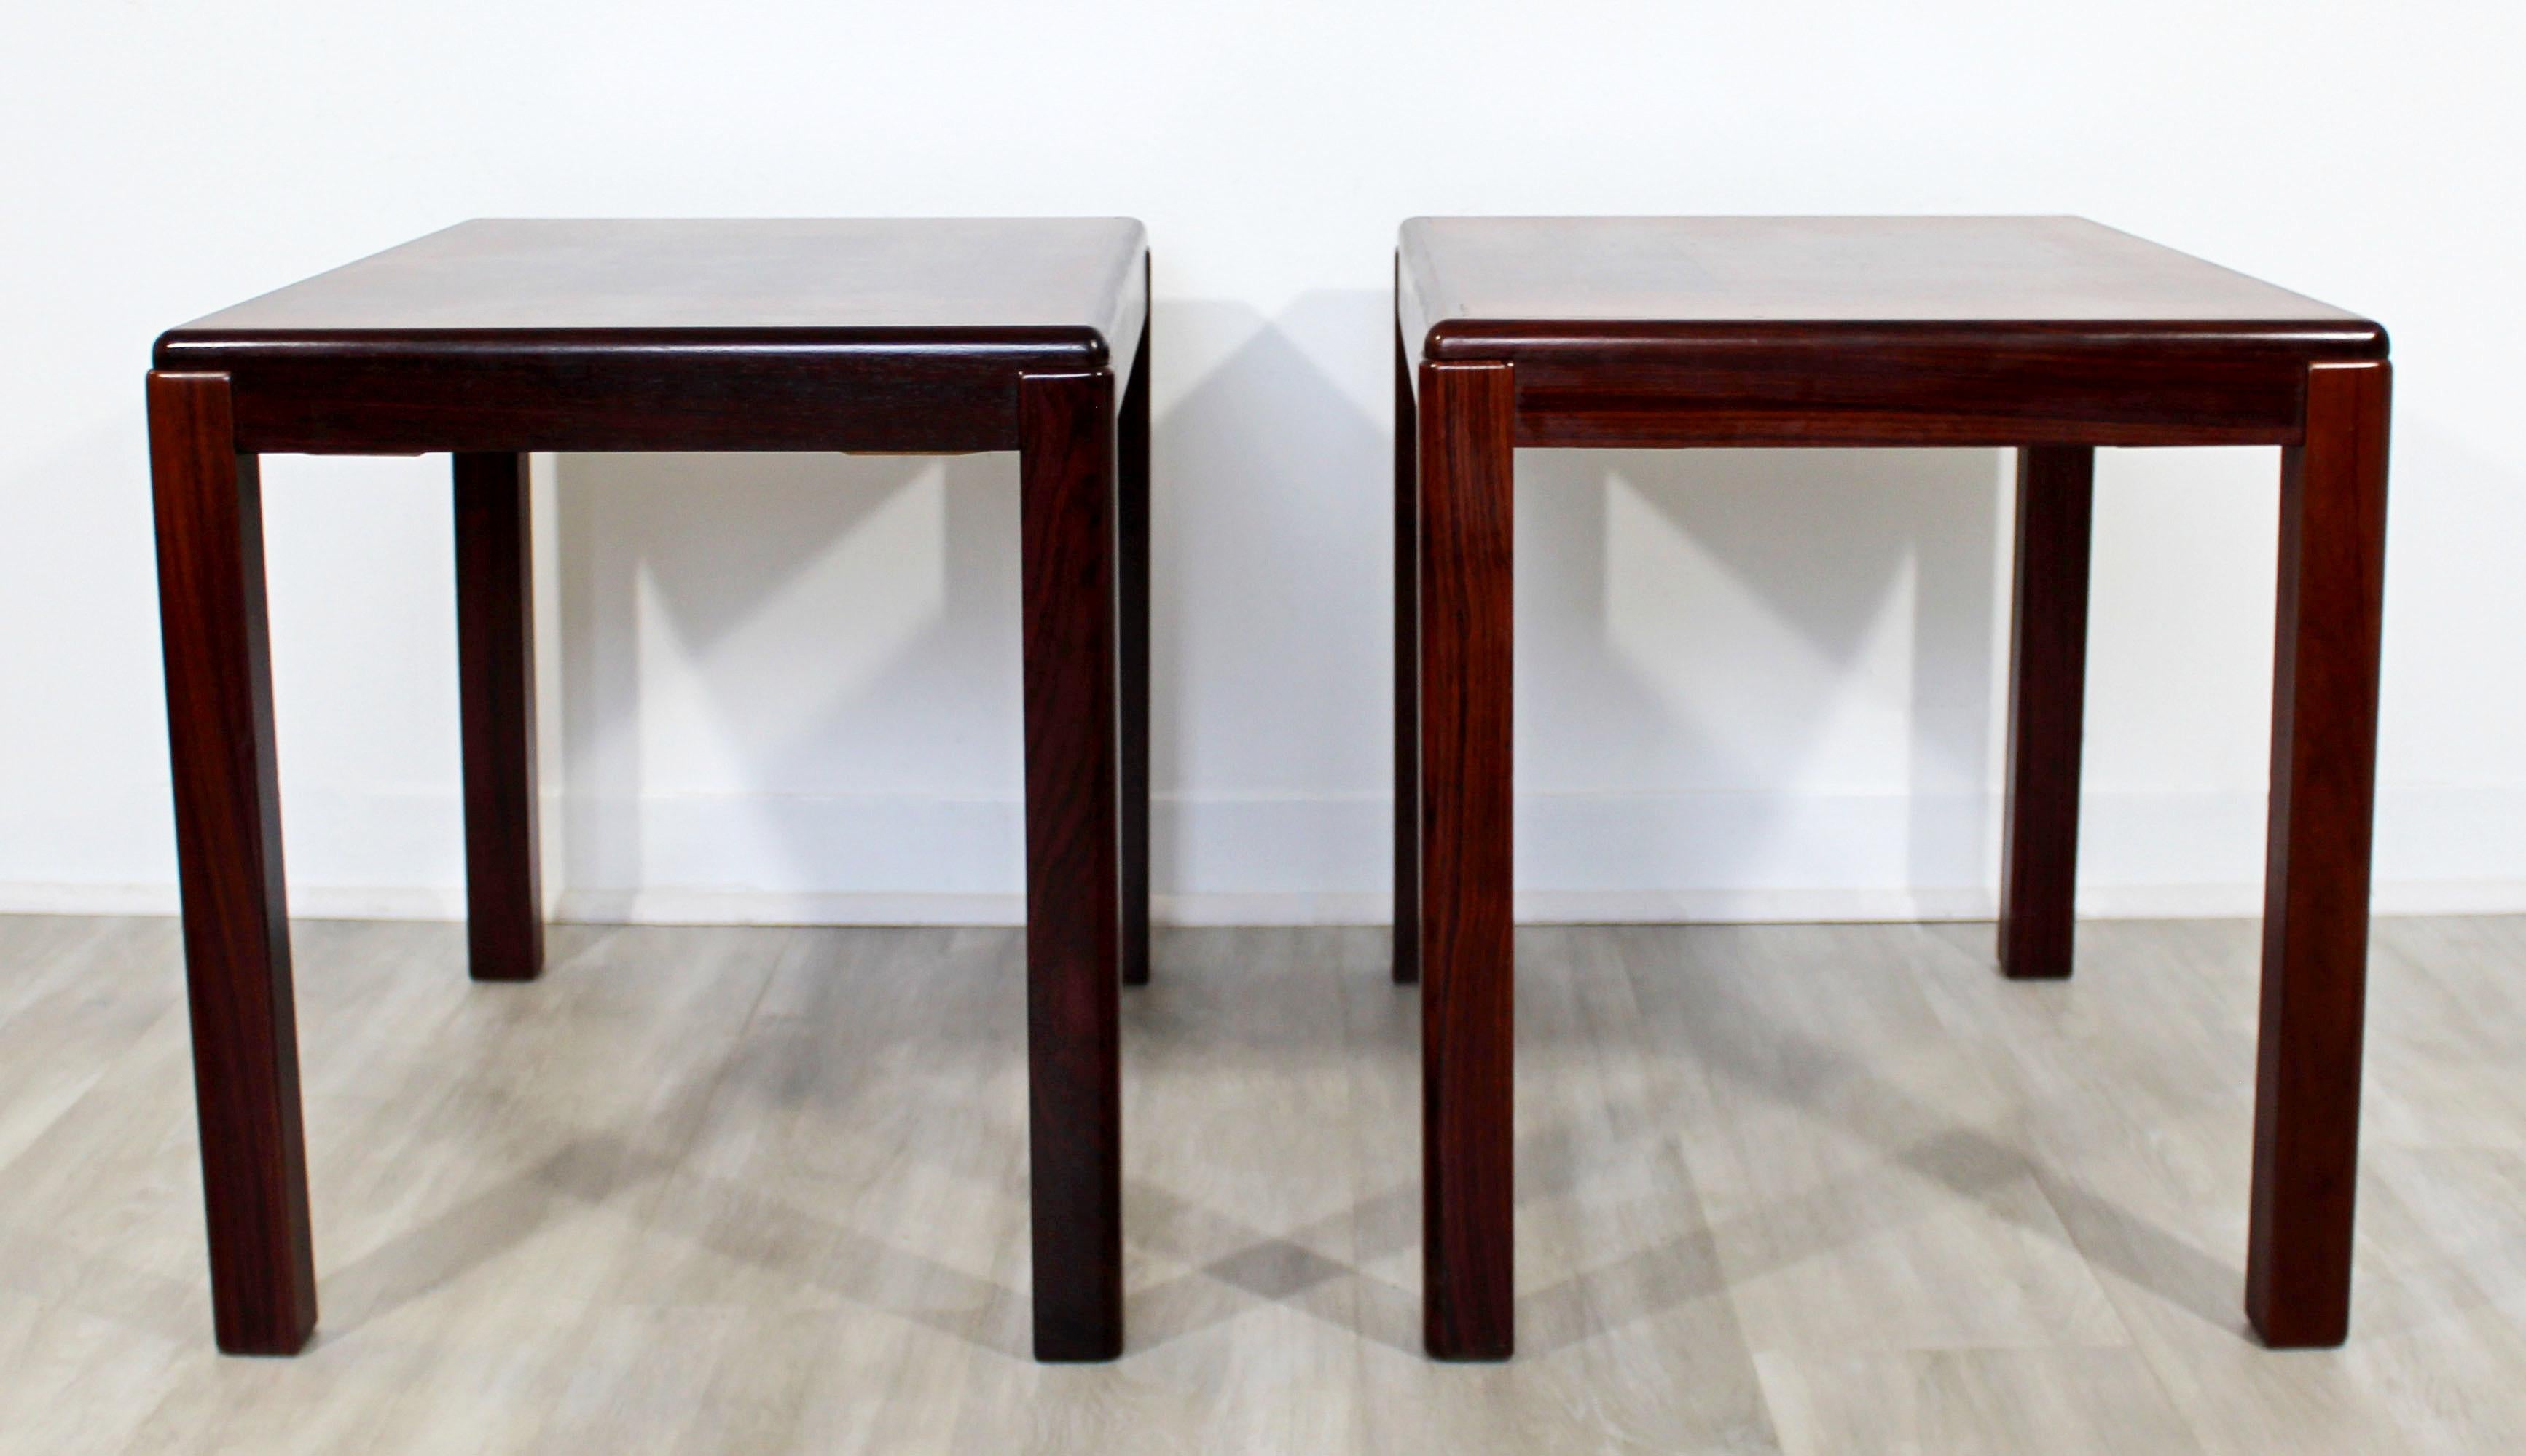 For your consideration is a ravishing pair of side or end tables, made of solid rosewood, by Vejle Stole Mobelfabrik, made in Denmark, circa 1970s. In very good vintage condition. The dimensions are 27.5